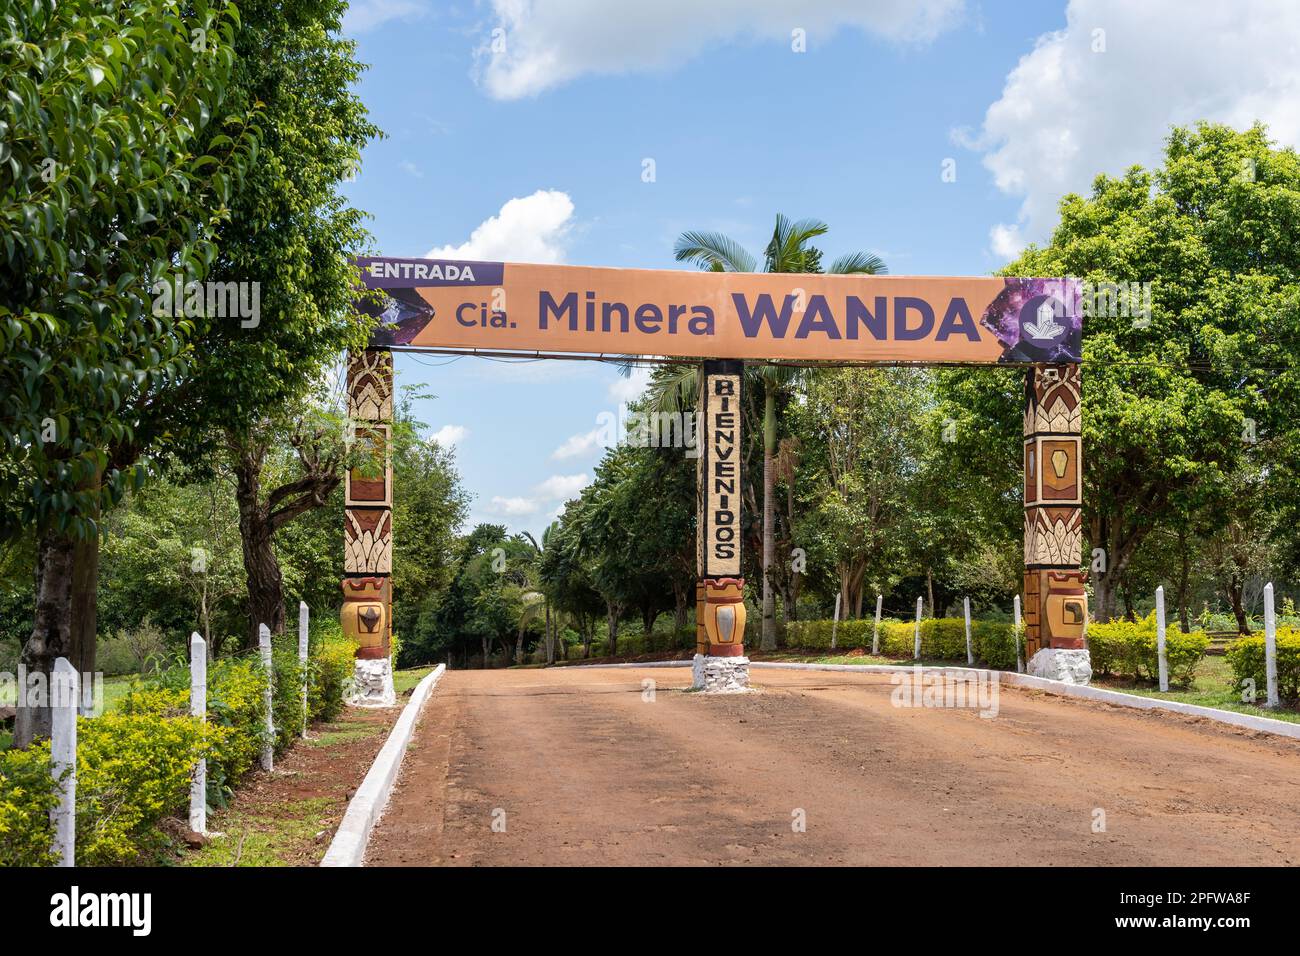 Misiones, Argentina - January 16, 2023: The entrance to Minera Wanda (Mines of Wanda) in Misiones, Argentina. Stock Photo